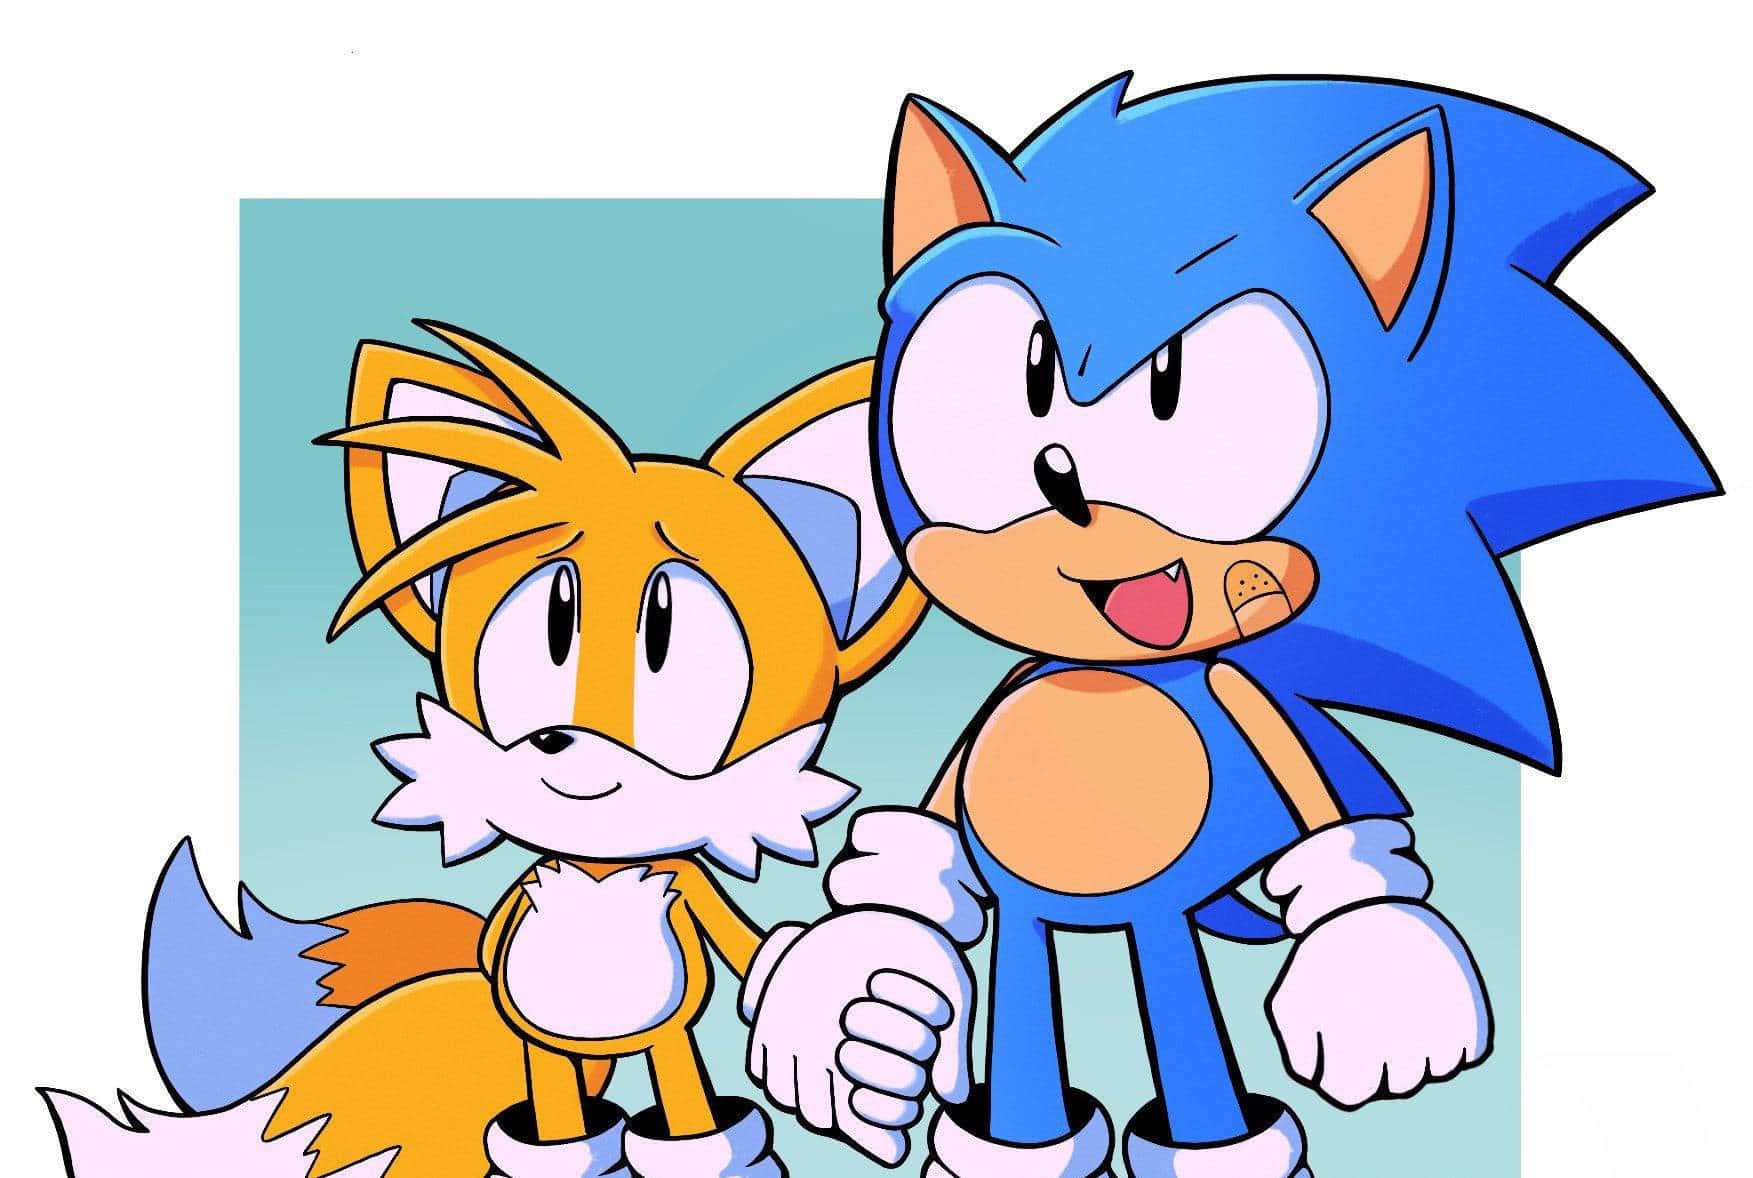 Sonic and Tails racing through the Green Hill Zone together. Wallpaper